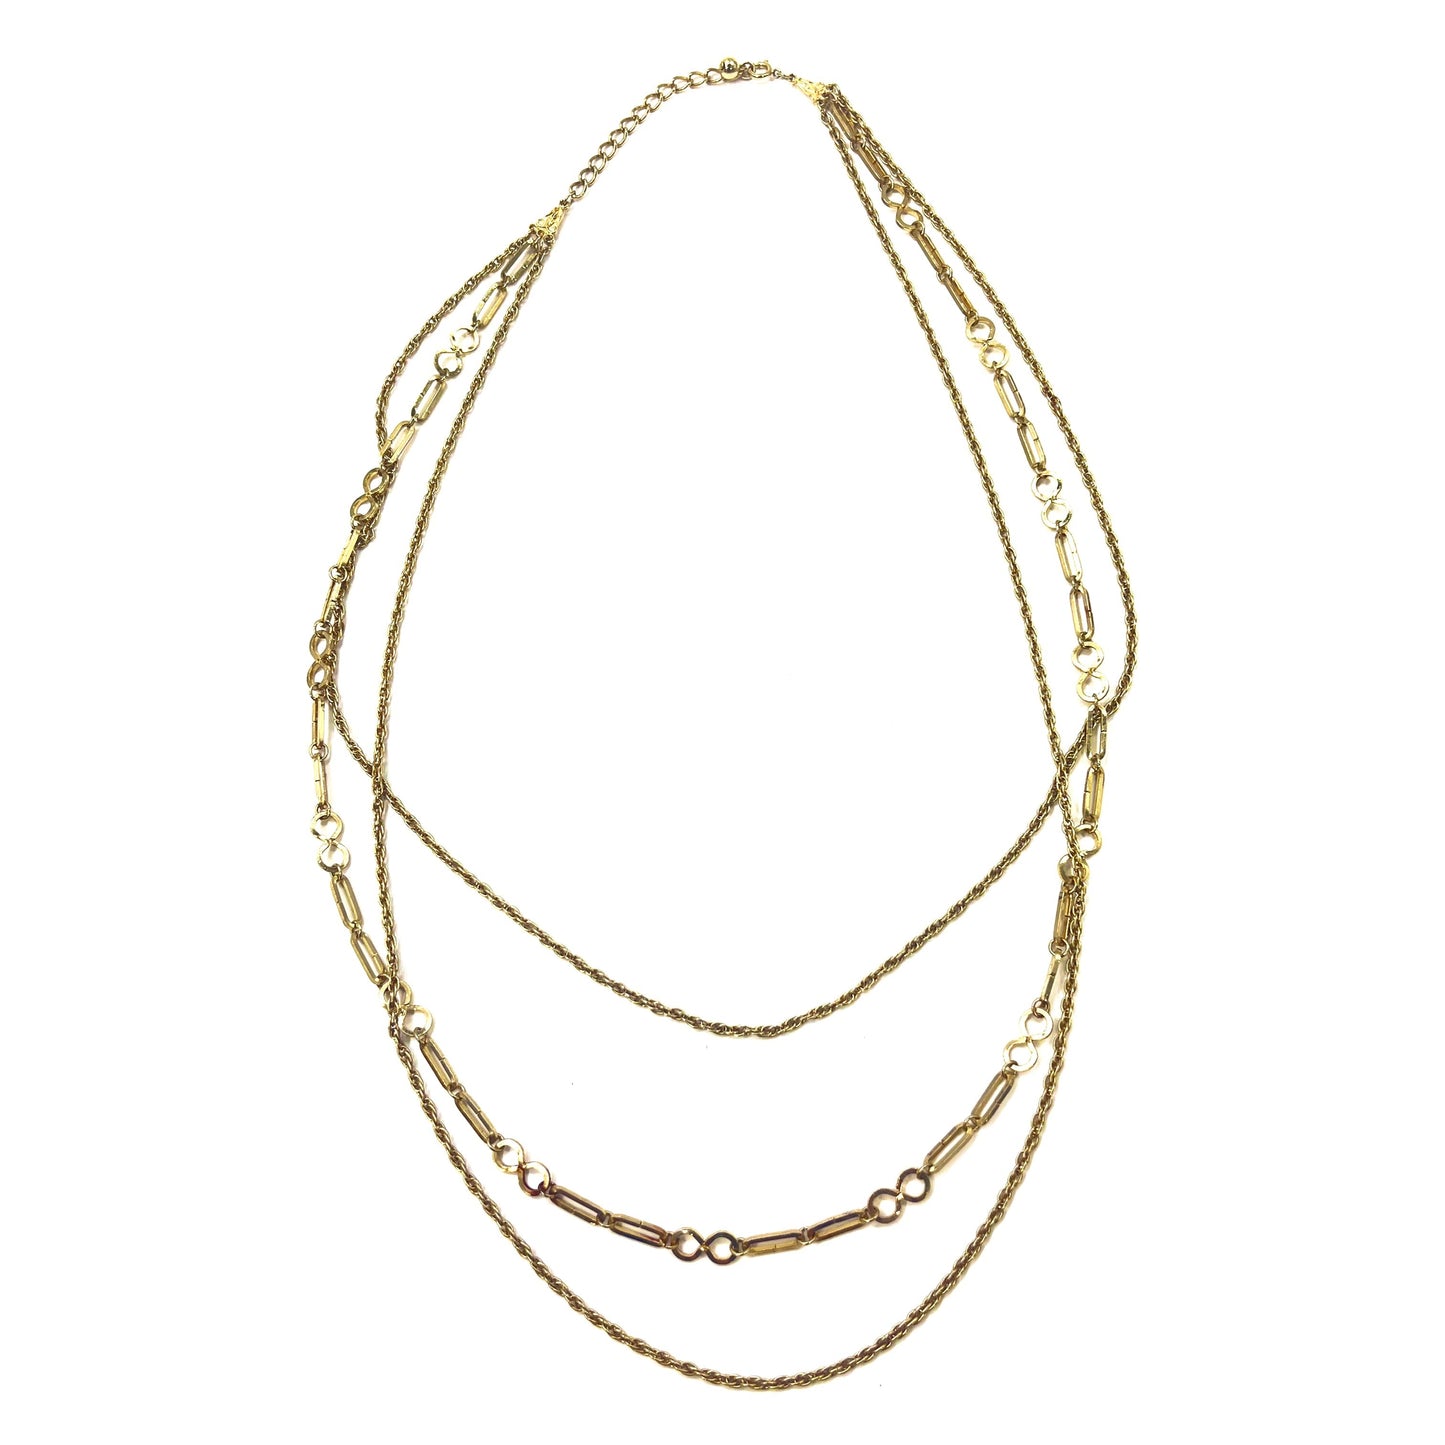 Vintage Gold Chain Necklaces 3連 ゴールドチェーン ネックレス 73cm